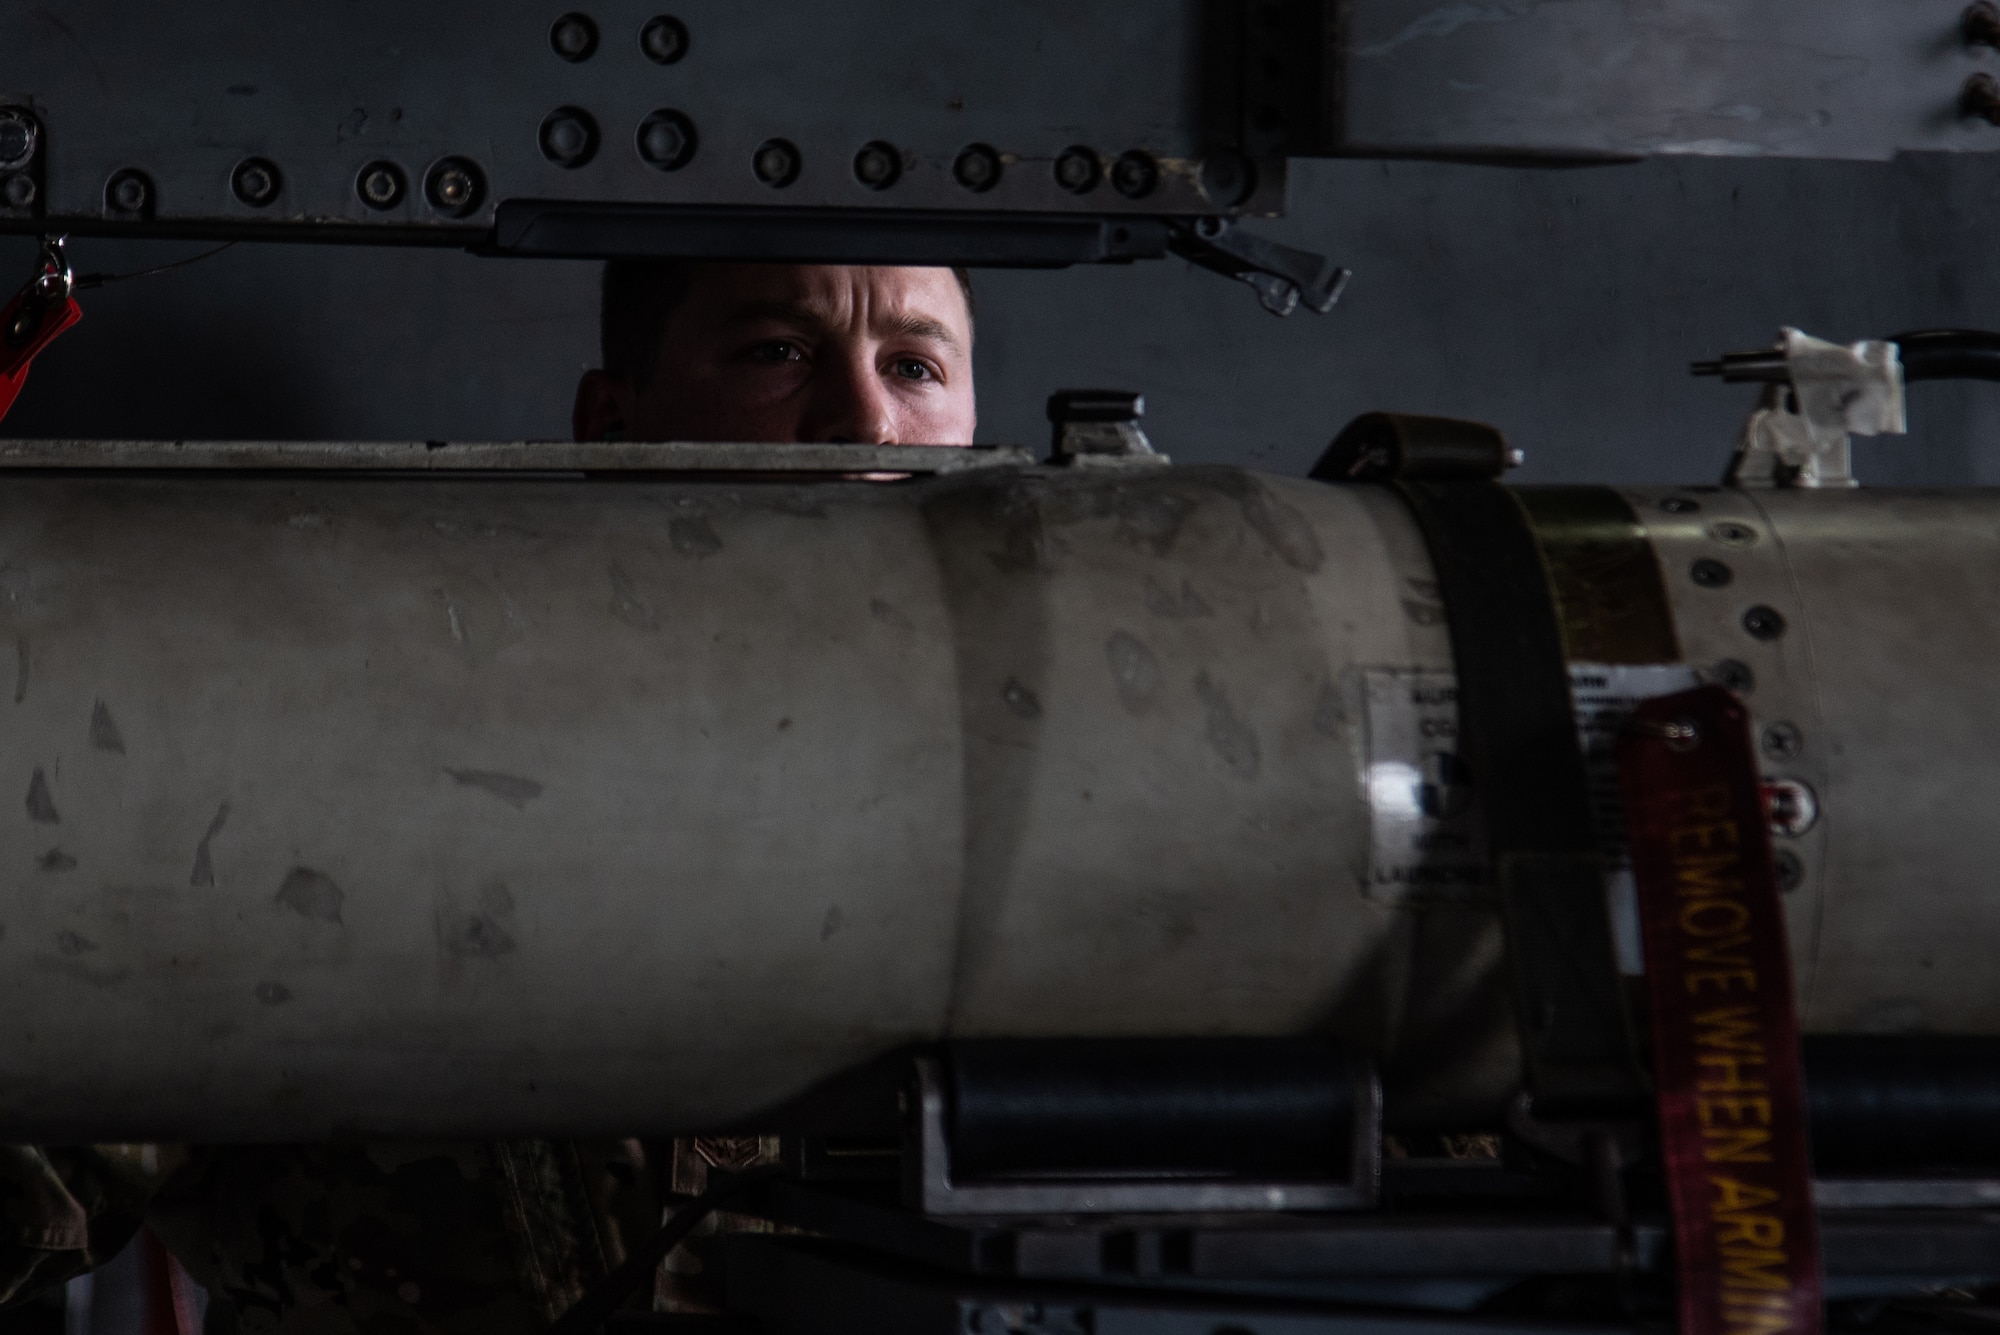 U.S. Air Force Staff Sgt. Justin Tankersley, 20th Maintenance Group weapons lead crew chief, double checks the new tool he created to ensure it is properly secured on a munition at Shaw Air Force Base, S.C., Oct. 16, 2018.